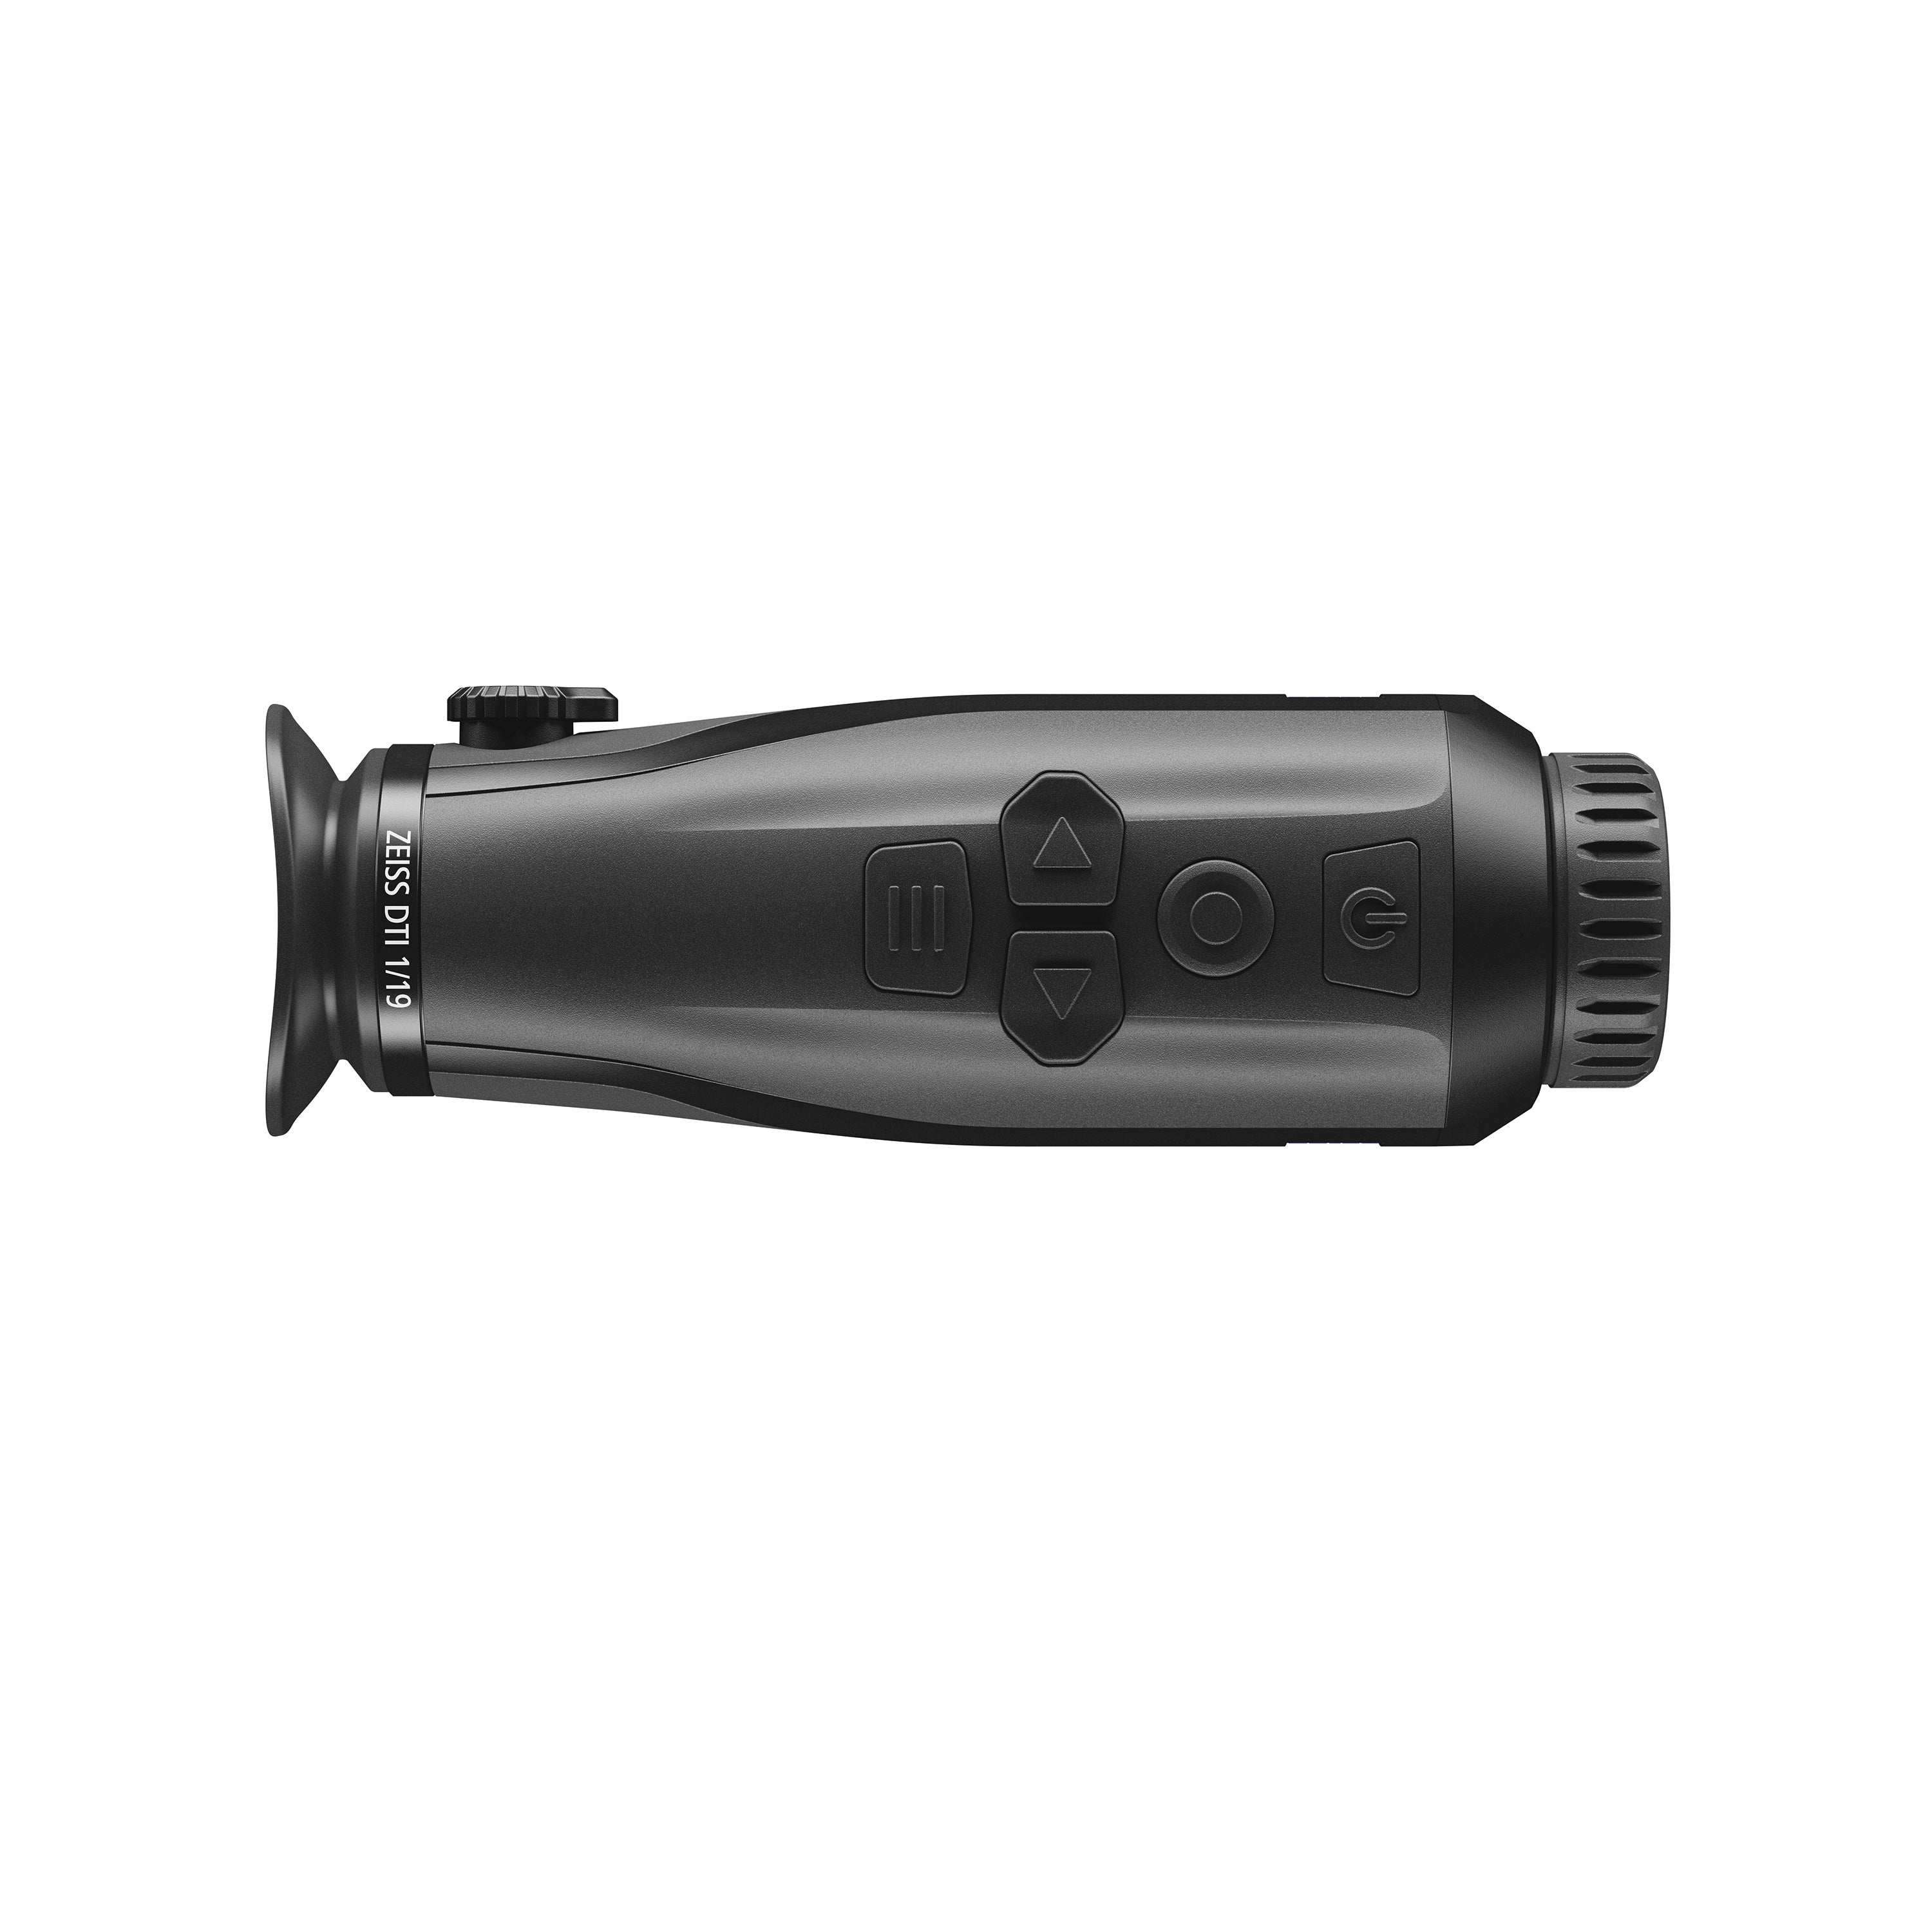 Zeiss DTI 1 Thermal Imaging Camera High-Resolution Monocular for Hunting and Wildlife Observation